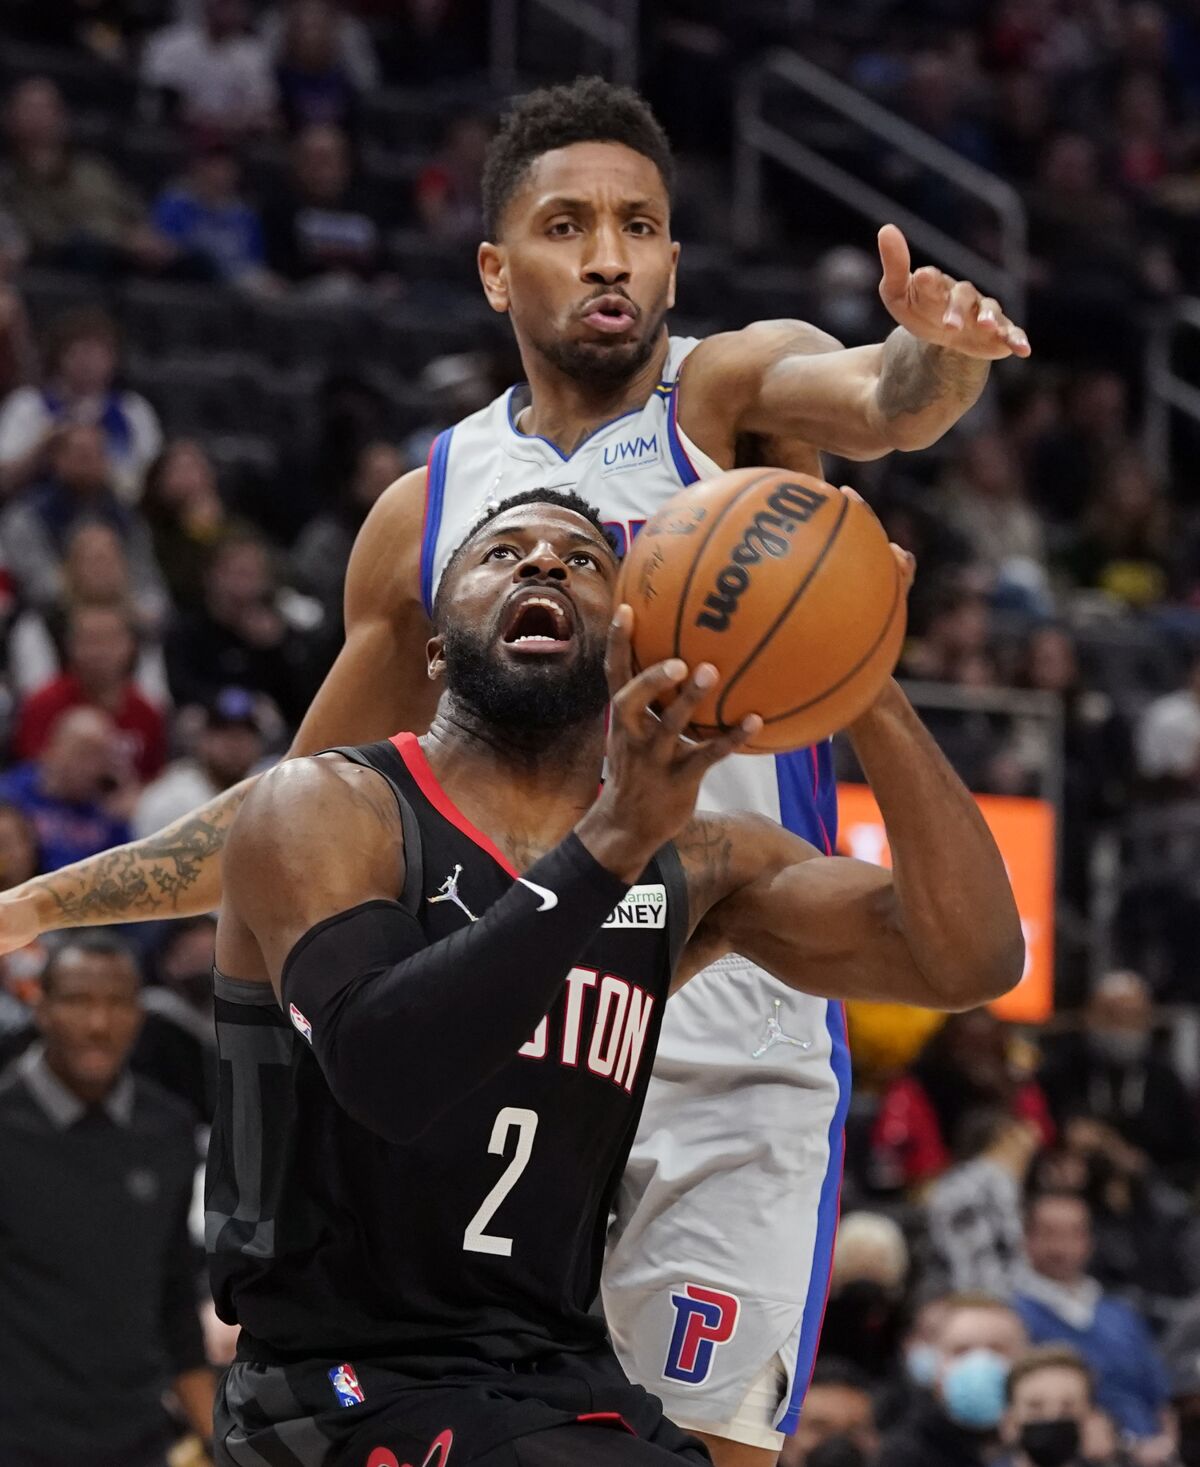 Detroit Pistons guard Rodney McGruder attempts to block Houston Rockets forward David Nwaba (2) during the second half of an NBA basketball game, Saturday, Dec. 18, 2021, in Detroit. (AP Photo/Carlos Osorio)